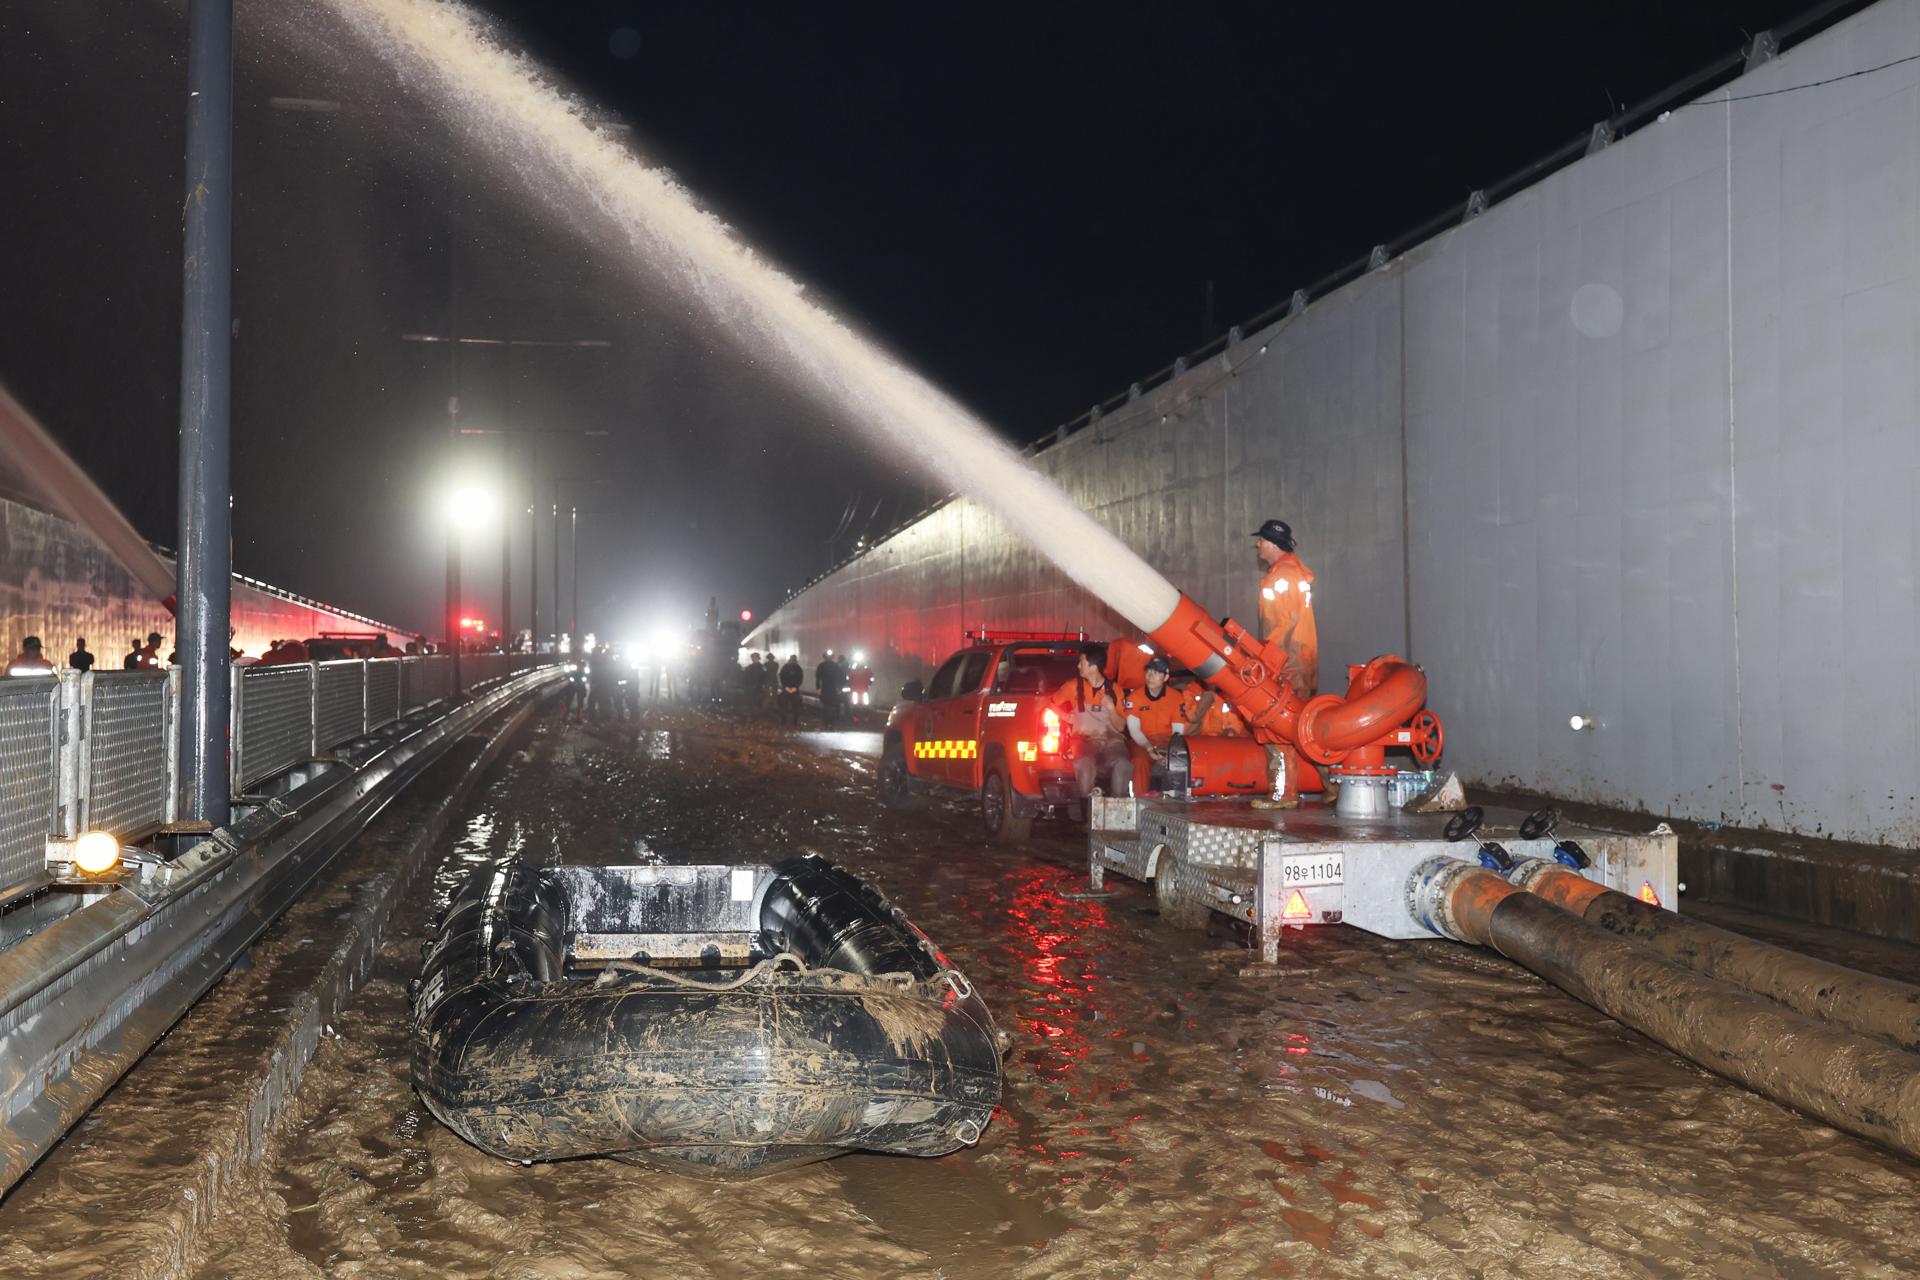 Rescue workers pump water out of a flooded underground tunnel in the town of Osong, North Chungcheong Province, central South Korea, on 17 July 2023, as they search for missing people who are believed to have been submerged inside the tunnel after a nearby river overflowed due to heavy rain on 15 July. EFE/EPA/YONHAP SOUTH KOREA OUT